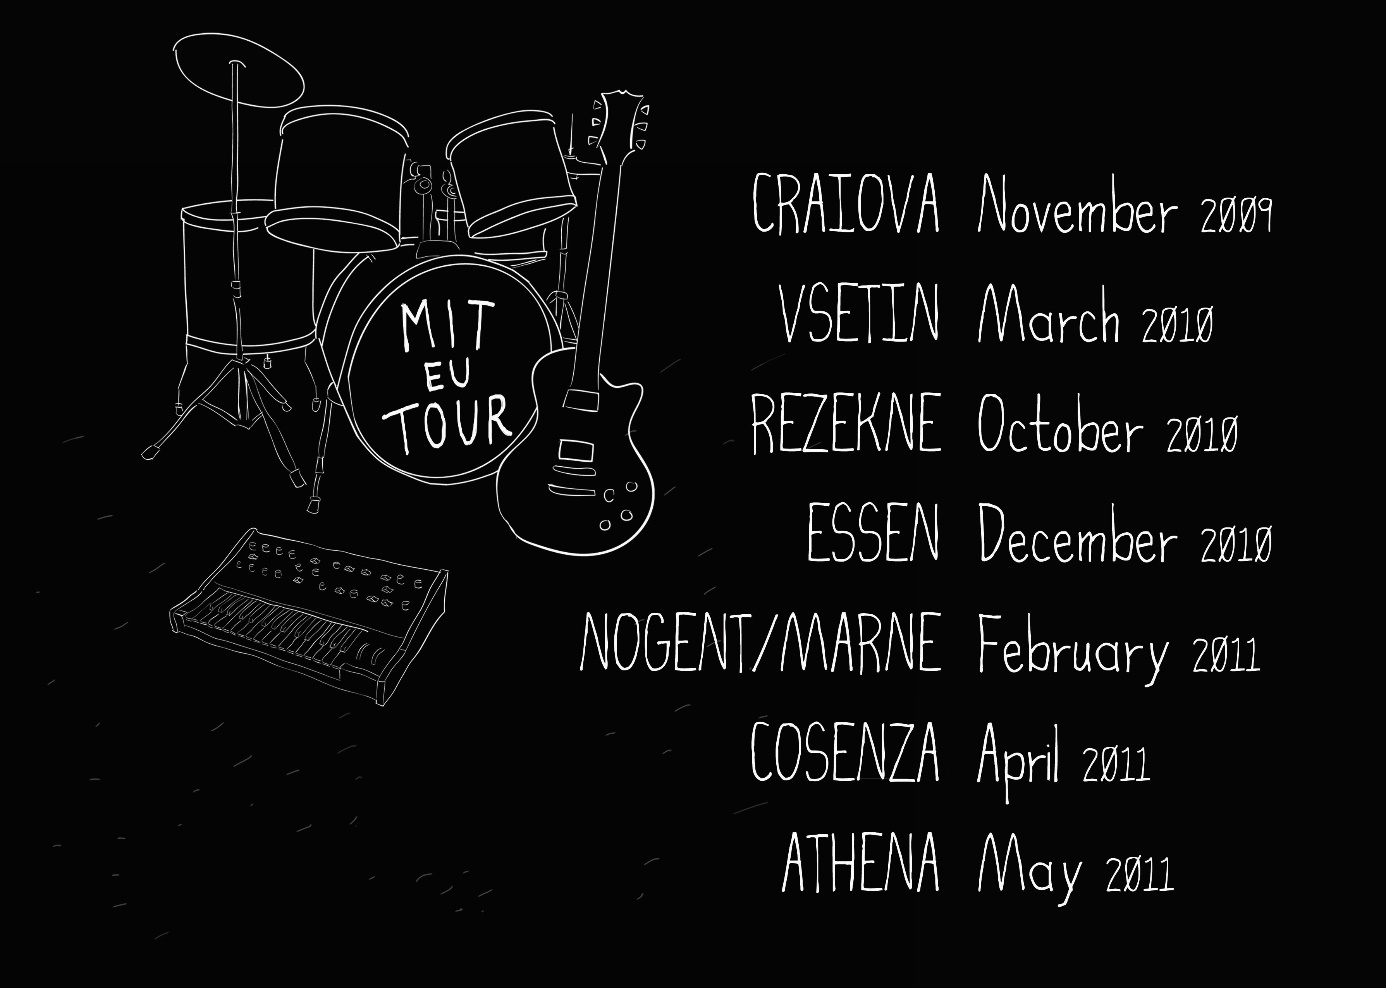 Tour dates of the project meetings and concerts